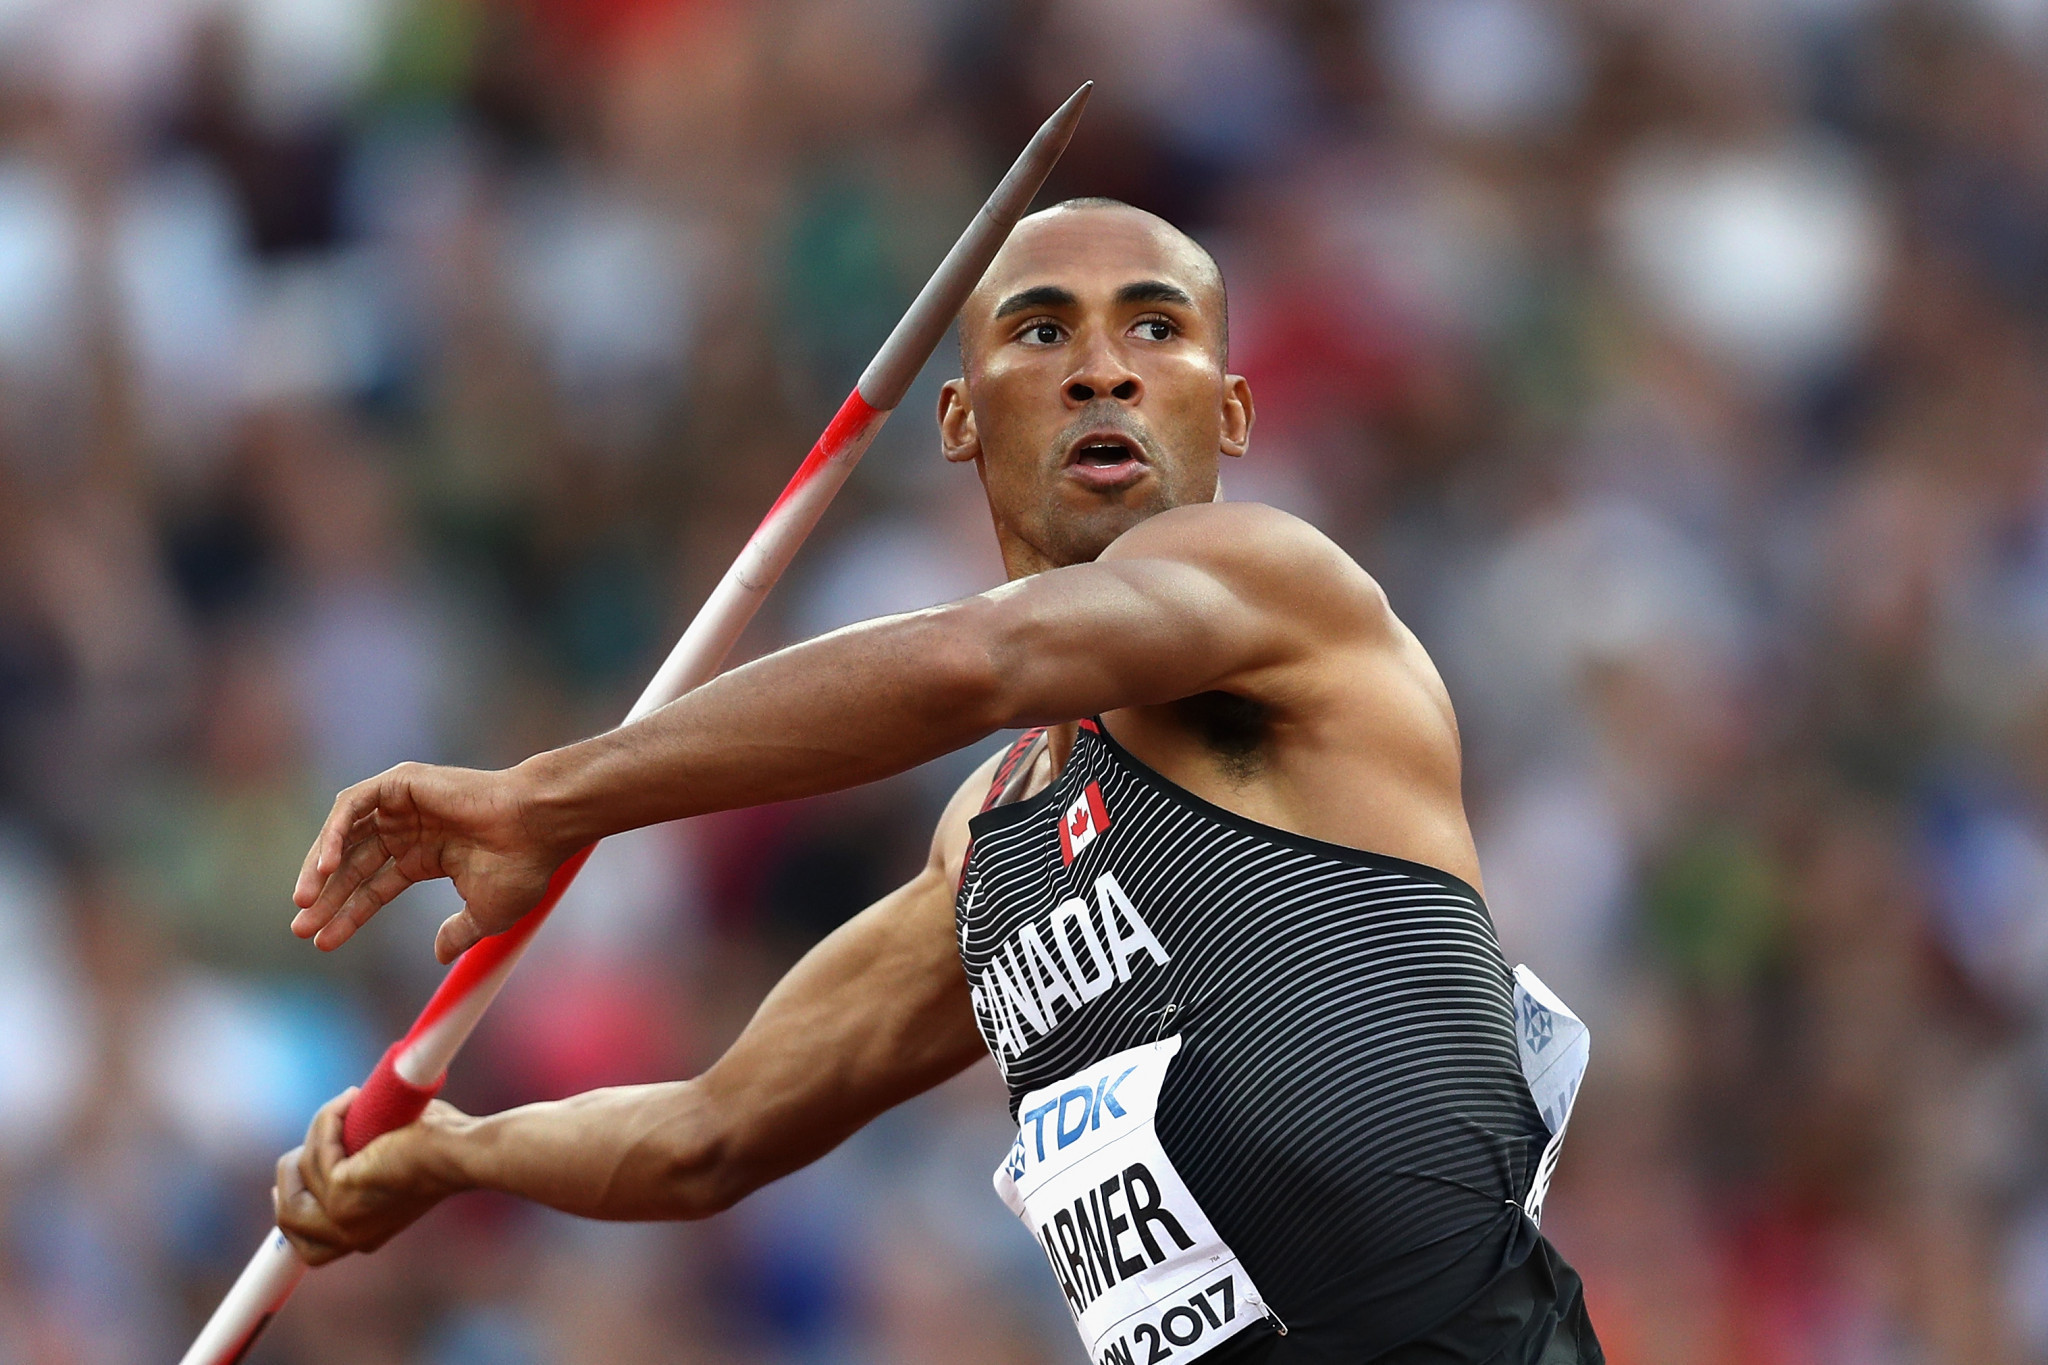 Olympic decathlon bronze medallist Damian Warner is among the 46 athletes named on Canada's athletics squad for Gold Coast 2018 ©Getty Images